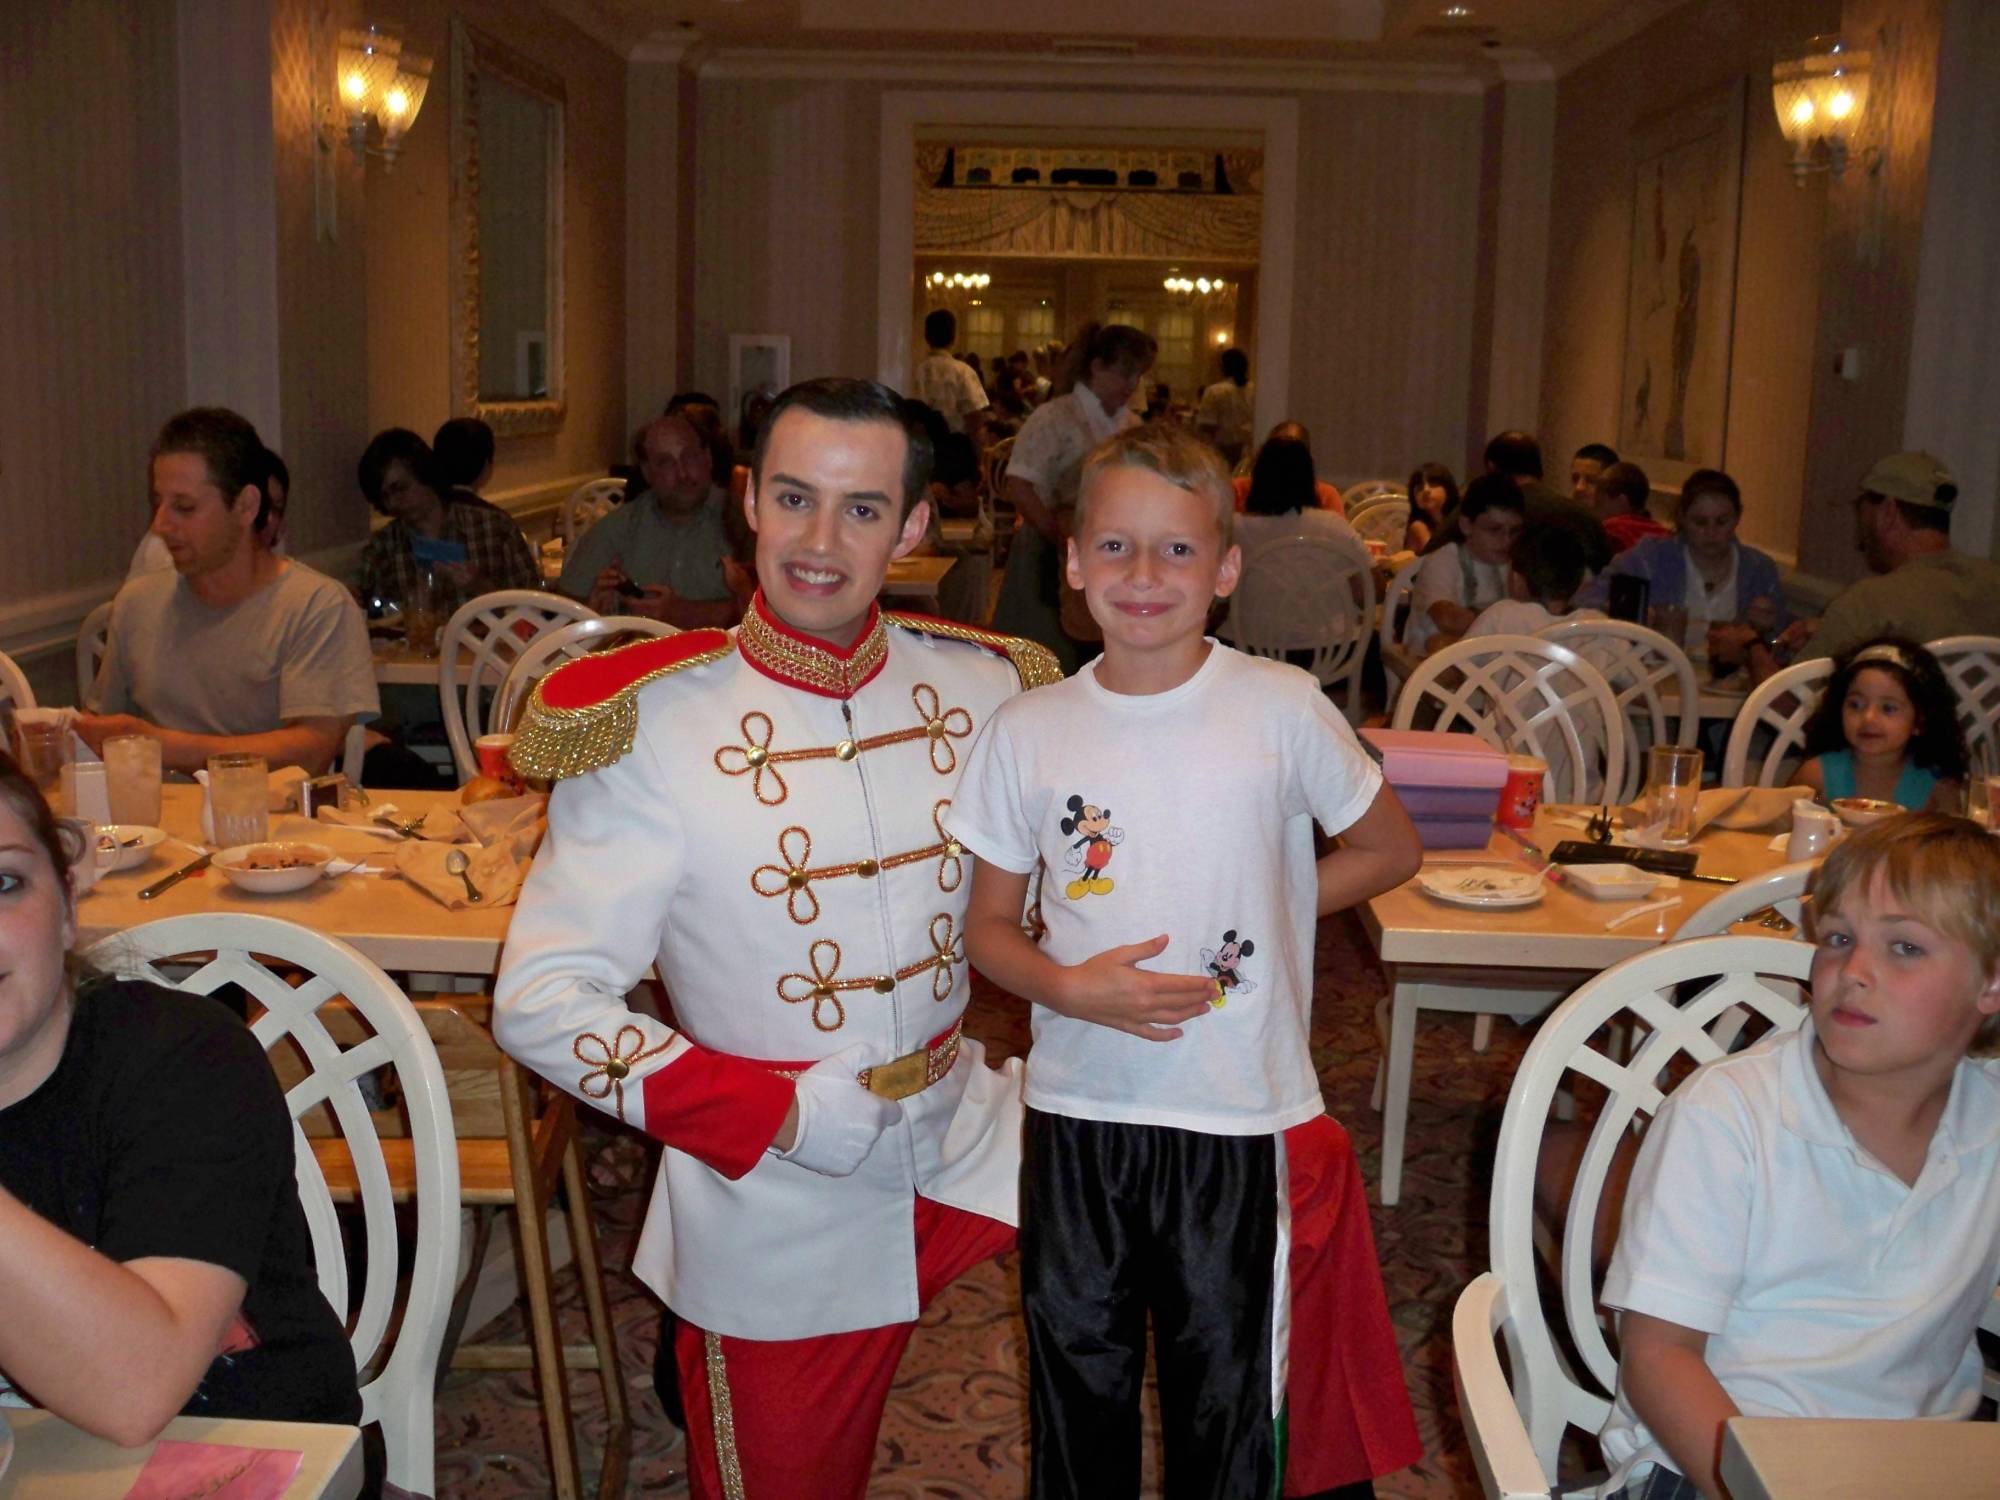 Grand Floridian - Dinner at 1900 Park Fare with Cinderella